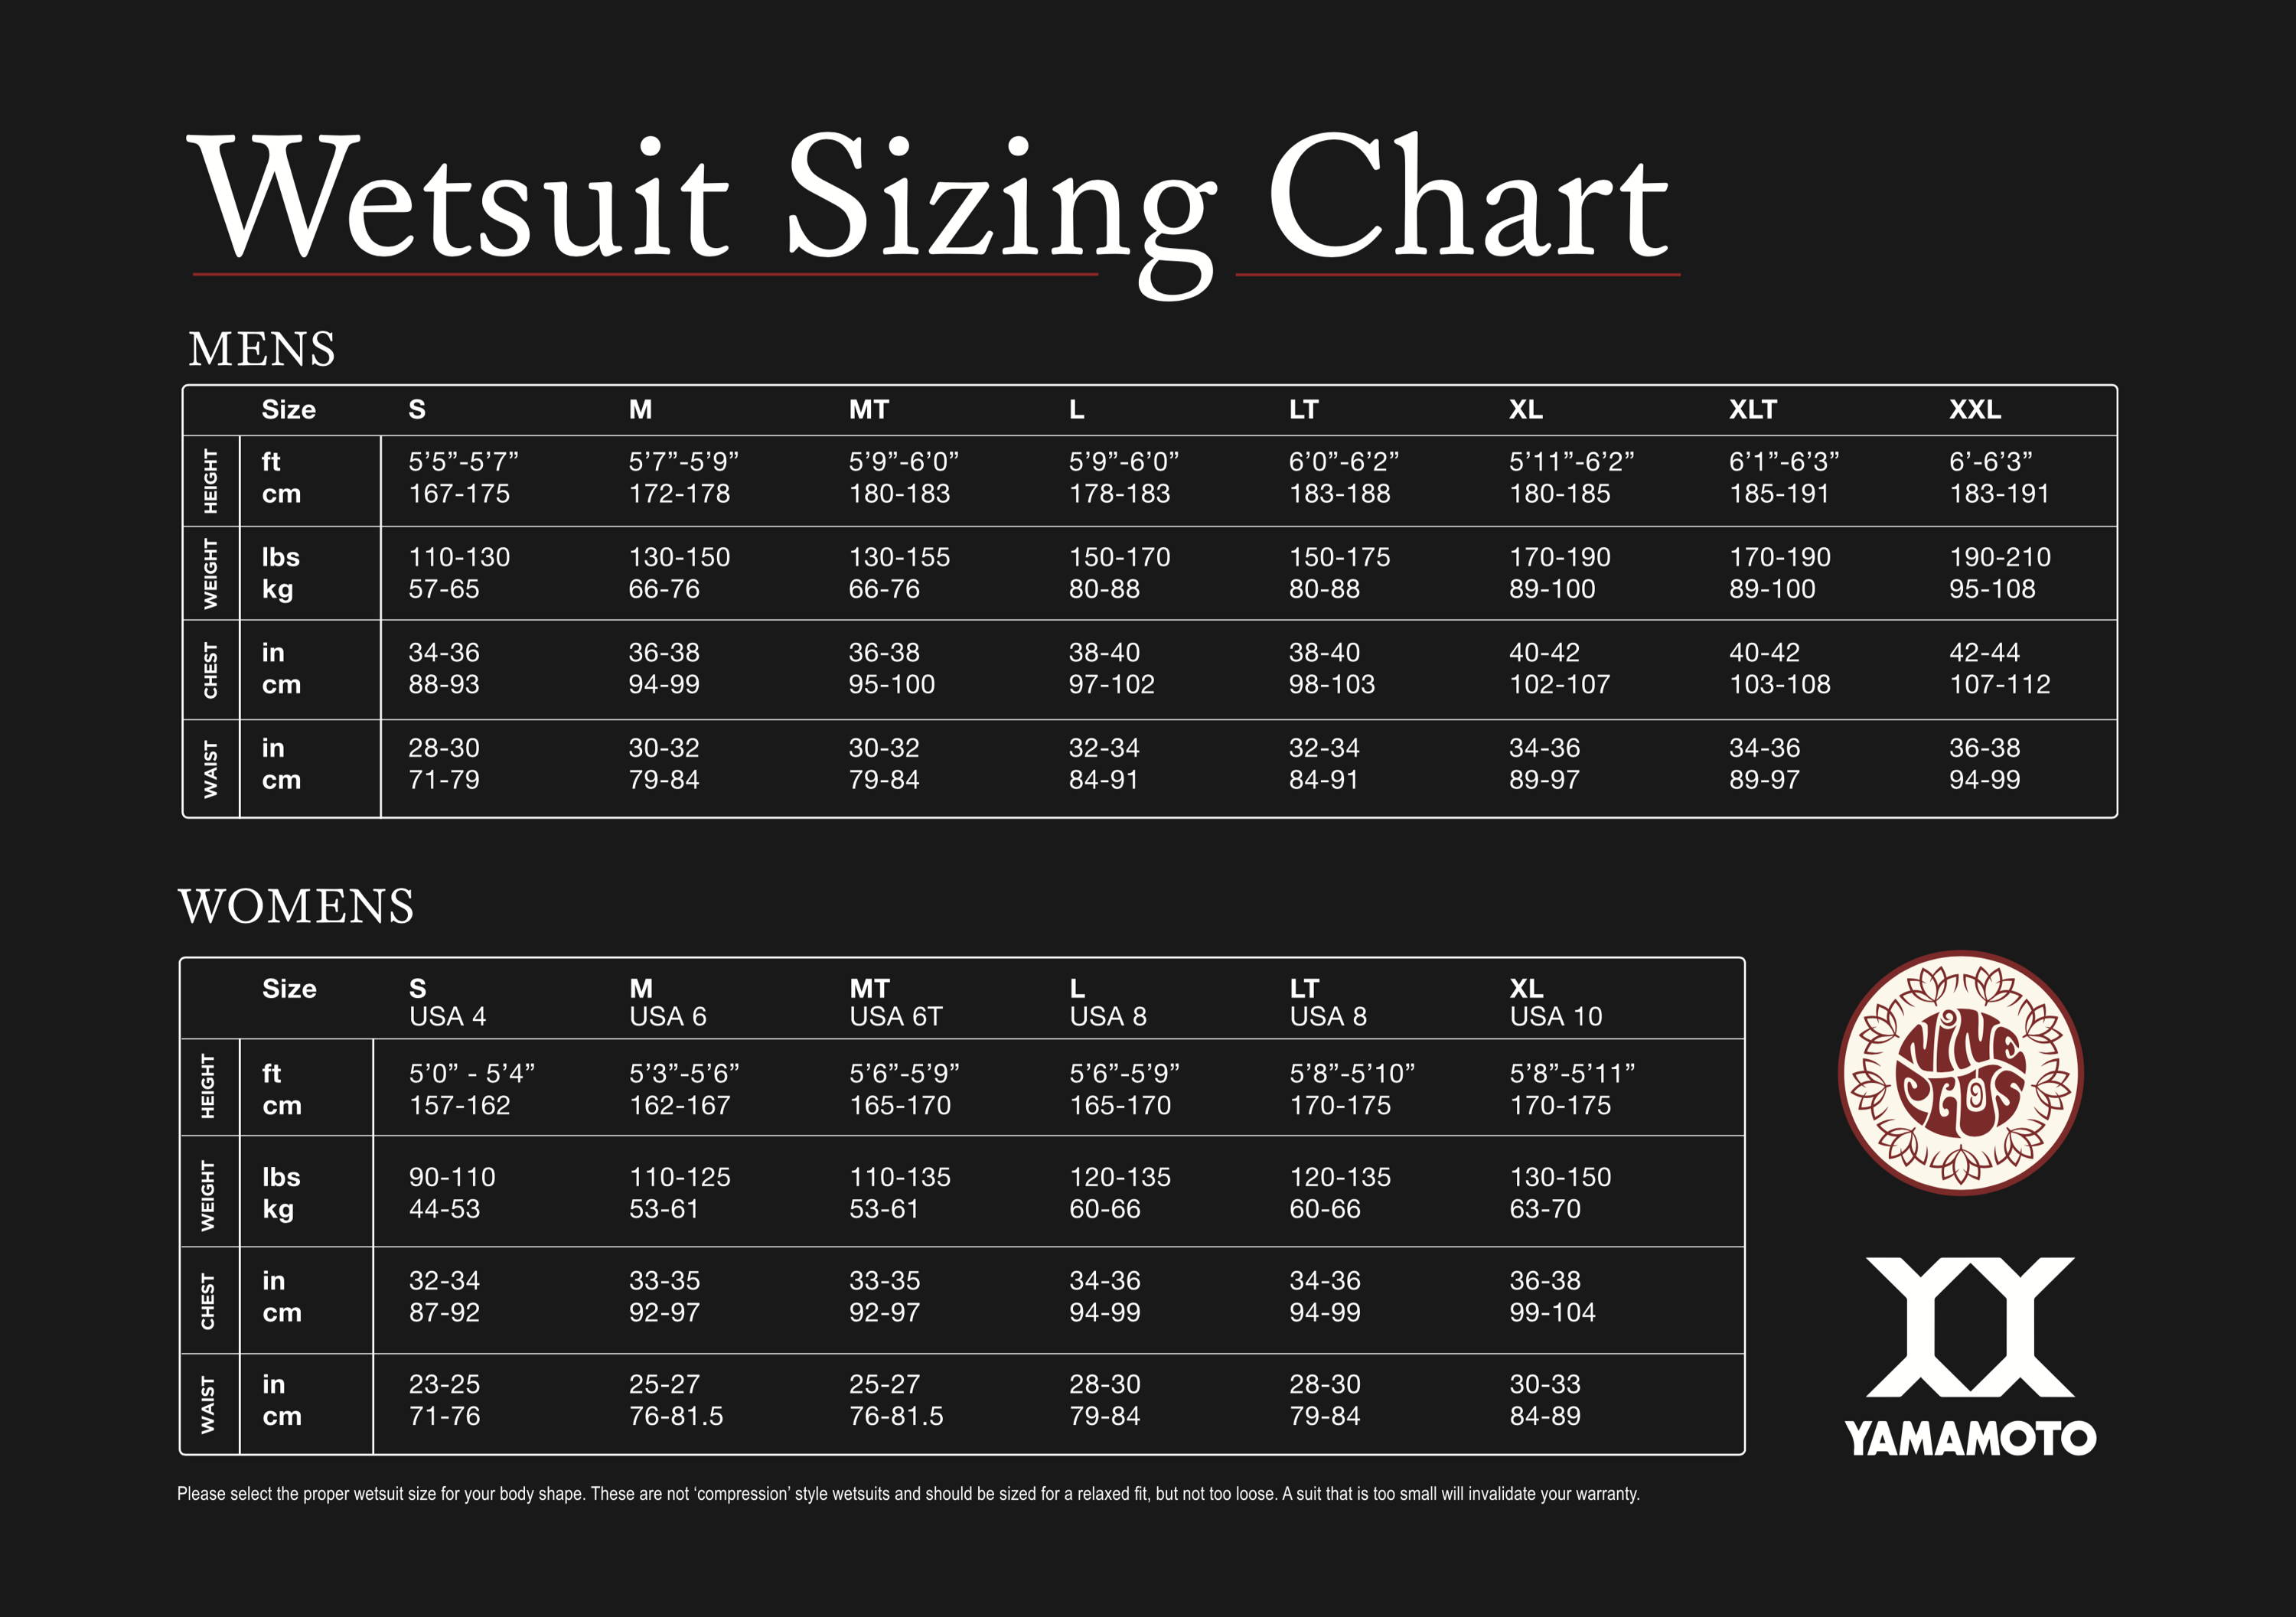 The wetsuit size chart